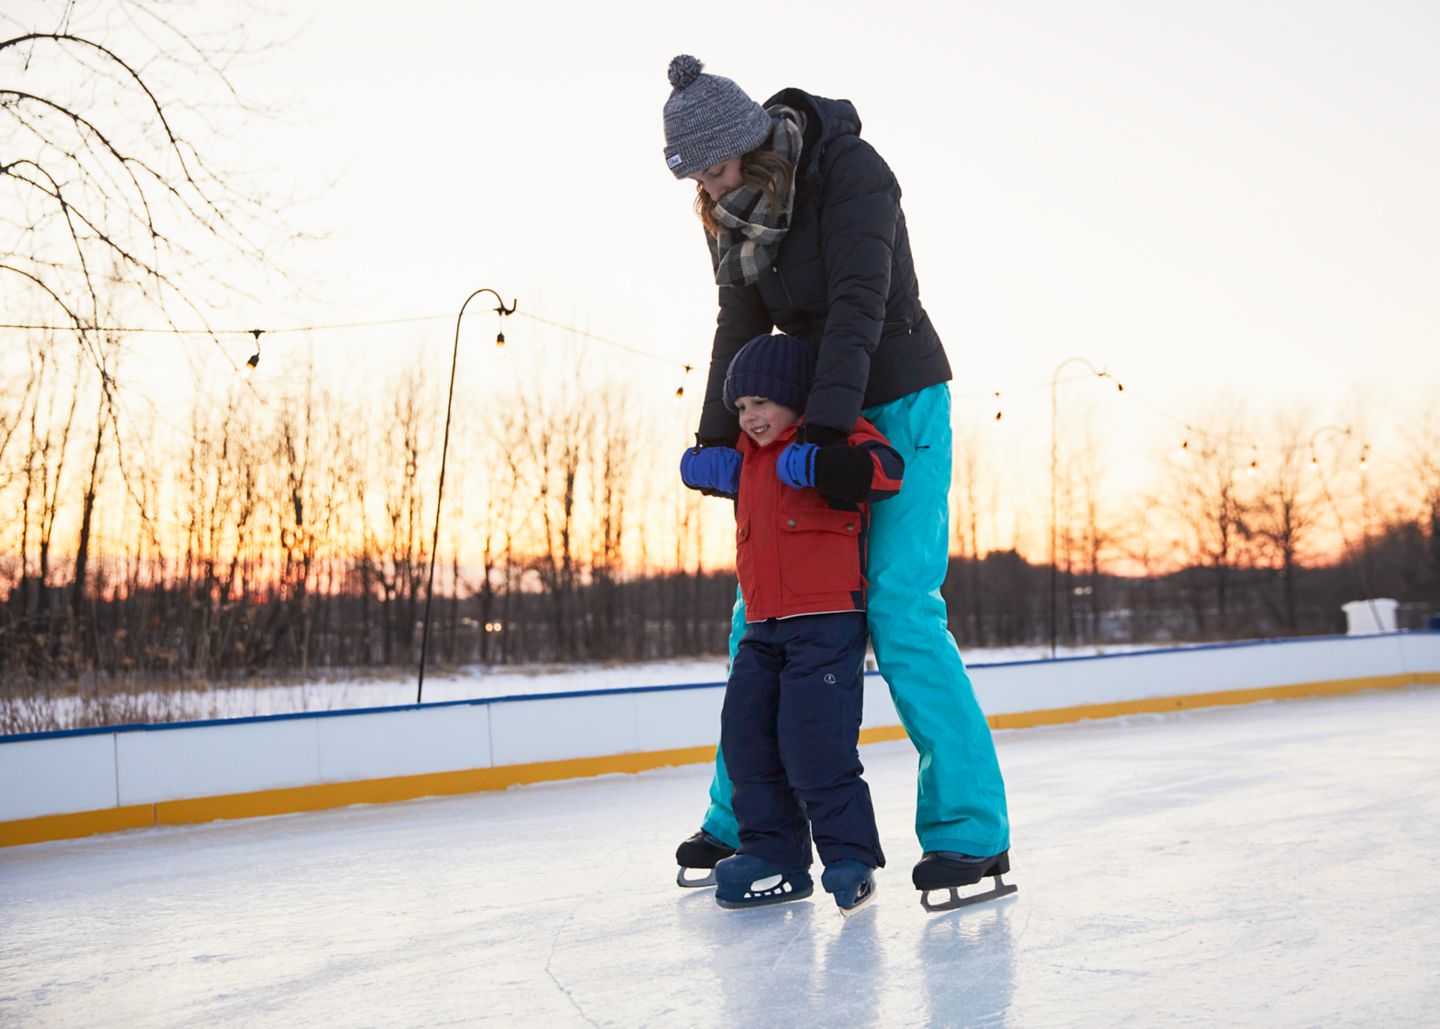 a mother and son iceskating on an outdoor rink with the sun setting in the background